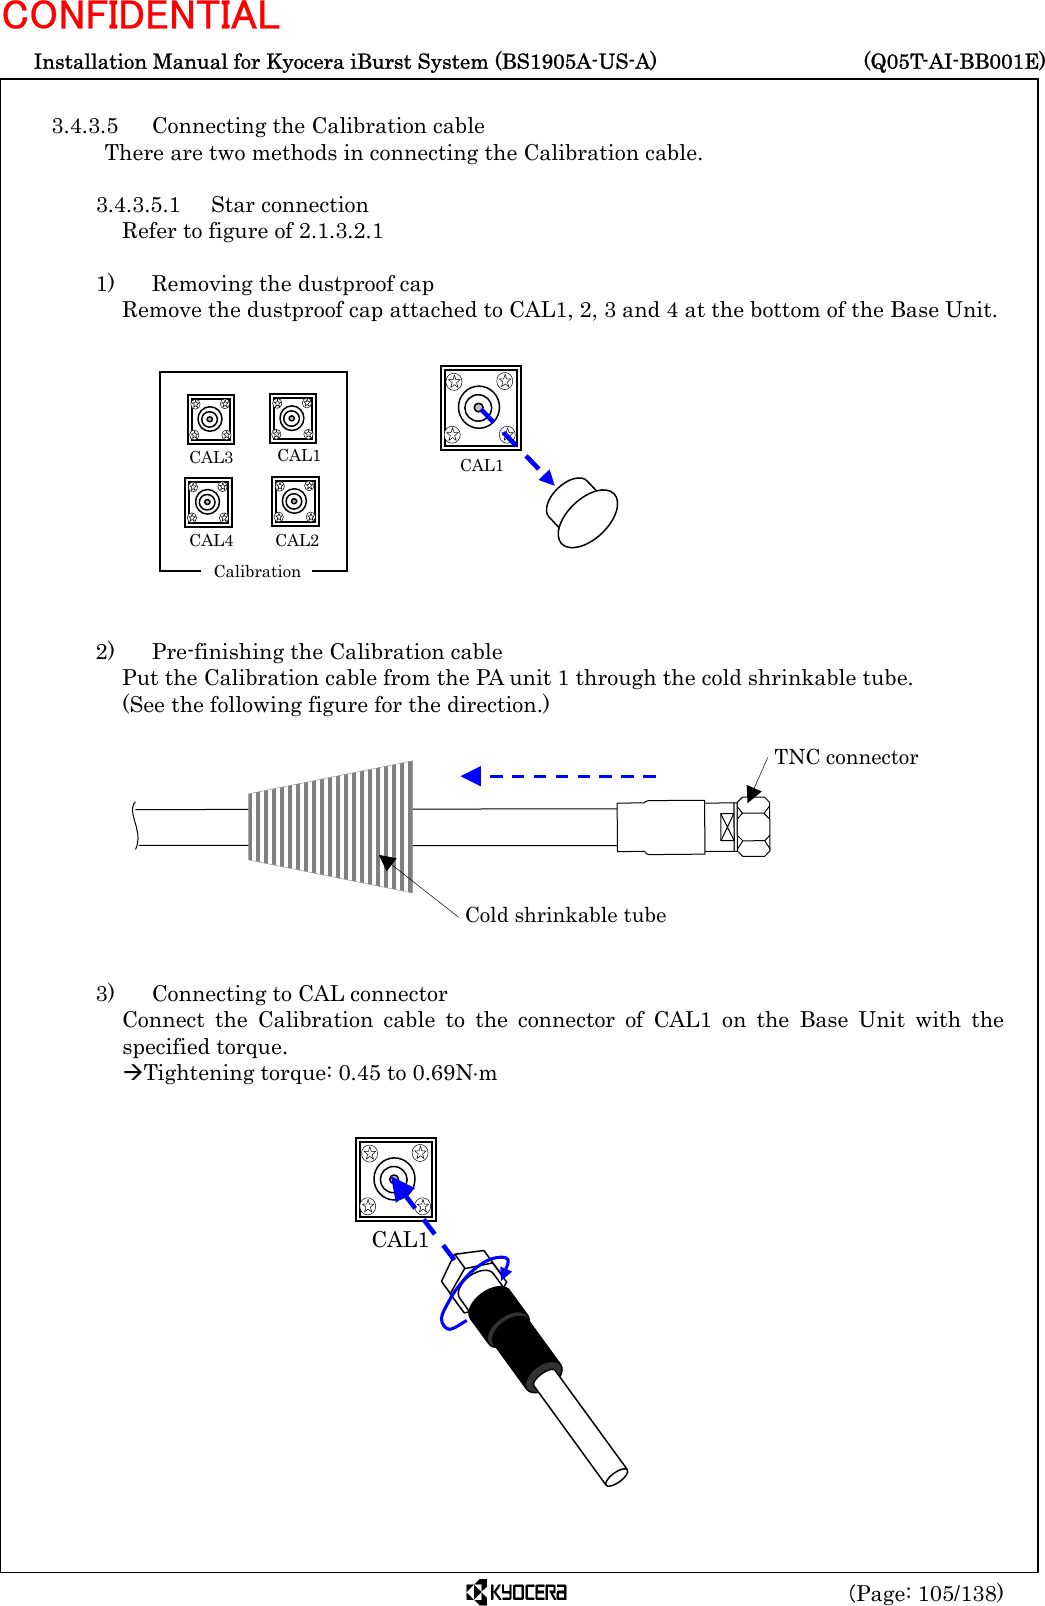  Installation Manual for Kyocera iBurst System (BS1905A-US-A)     (Q05T-AI-BB001E) (Page: 105/138) CONFIDENTIAL  3.4.3.5  Connecting the Calibration cable There are two methods in connecting the Calibration cable.  3.4.3.5.1 Star connection Refer to figure of 2.1.3.2.1  1)    Removing the dustproof cap Remove the dustproof cap attached to CAL1, 2, 3 and 4 at the bottom of the Base Unit.             2)    Pre-finishing the Calibration cable Put the Calibration cable from the PA unit 1 through the cold shrinkable tube.   (See the following figure for the direction.)           3)    Connecting to CAL connector Connect the Calibration cable to the connector of CAL1 on the Base Unit with the specified torque. ÆTightening torque: 0.45 to 0.69N⋅m            Cold shrinkable tube TNC connector  CAL1CAL1 CAL2  CAL3 CAL4    Calibration CAL1  